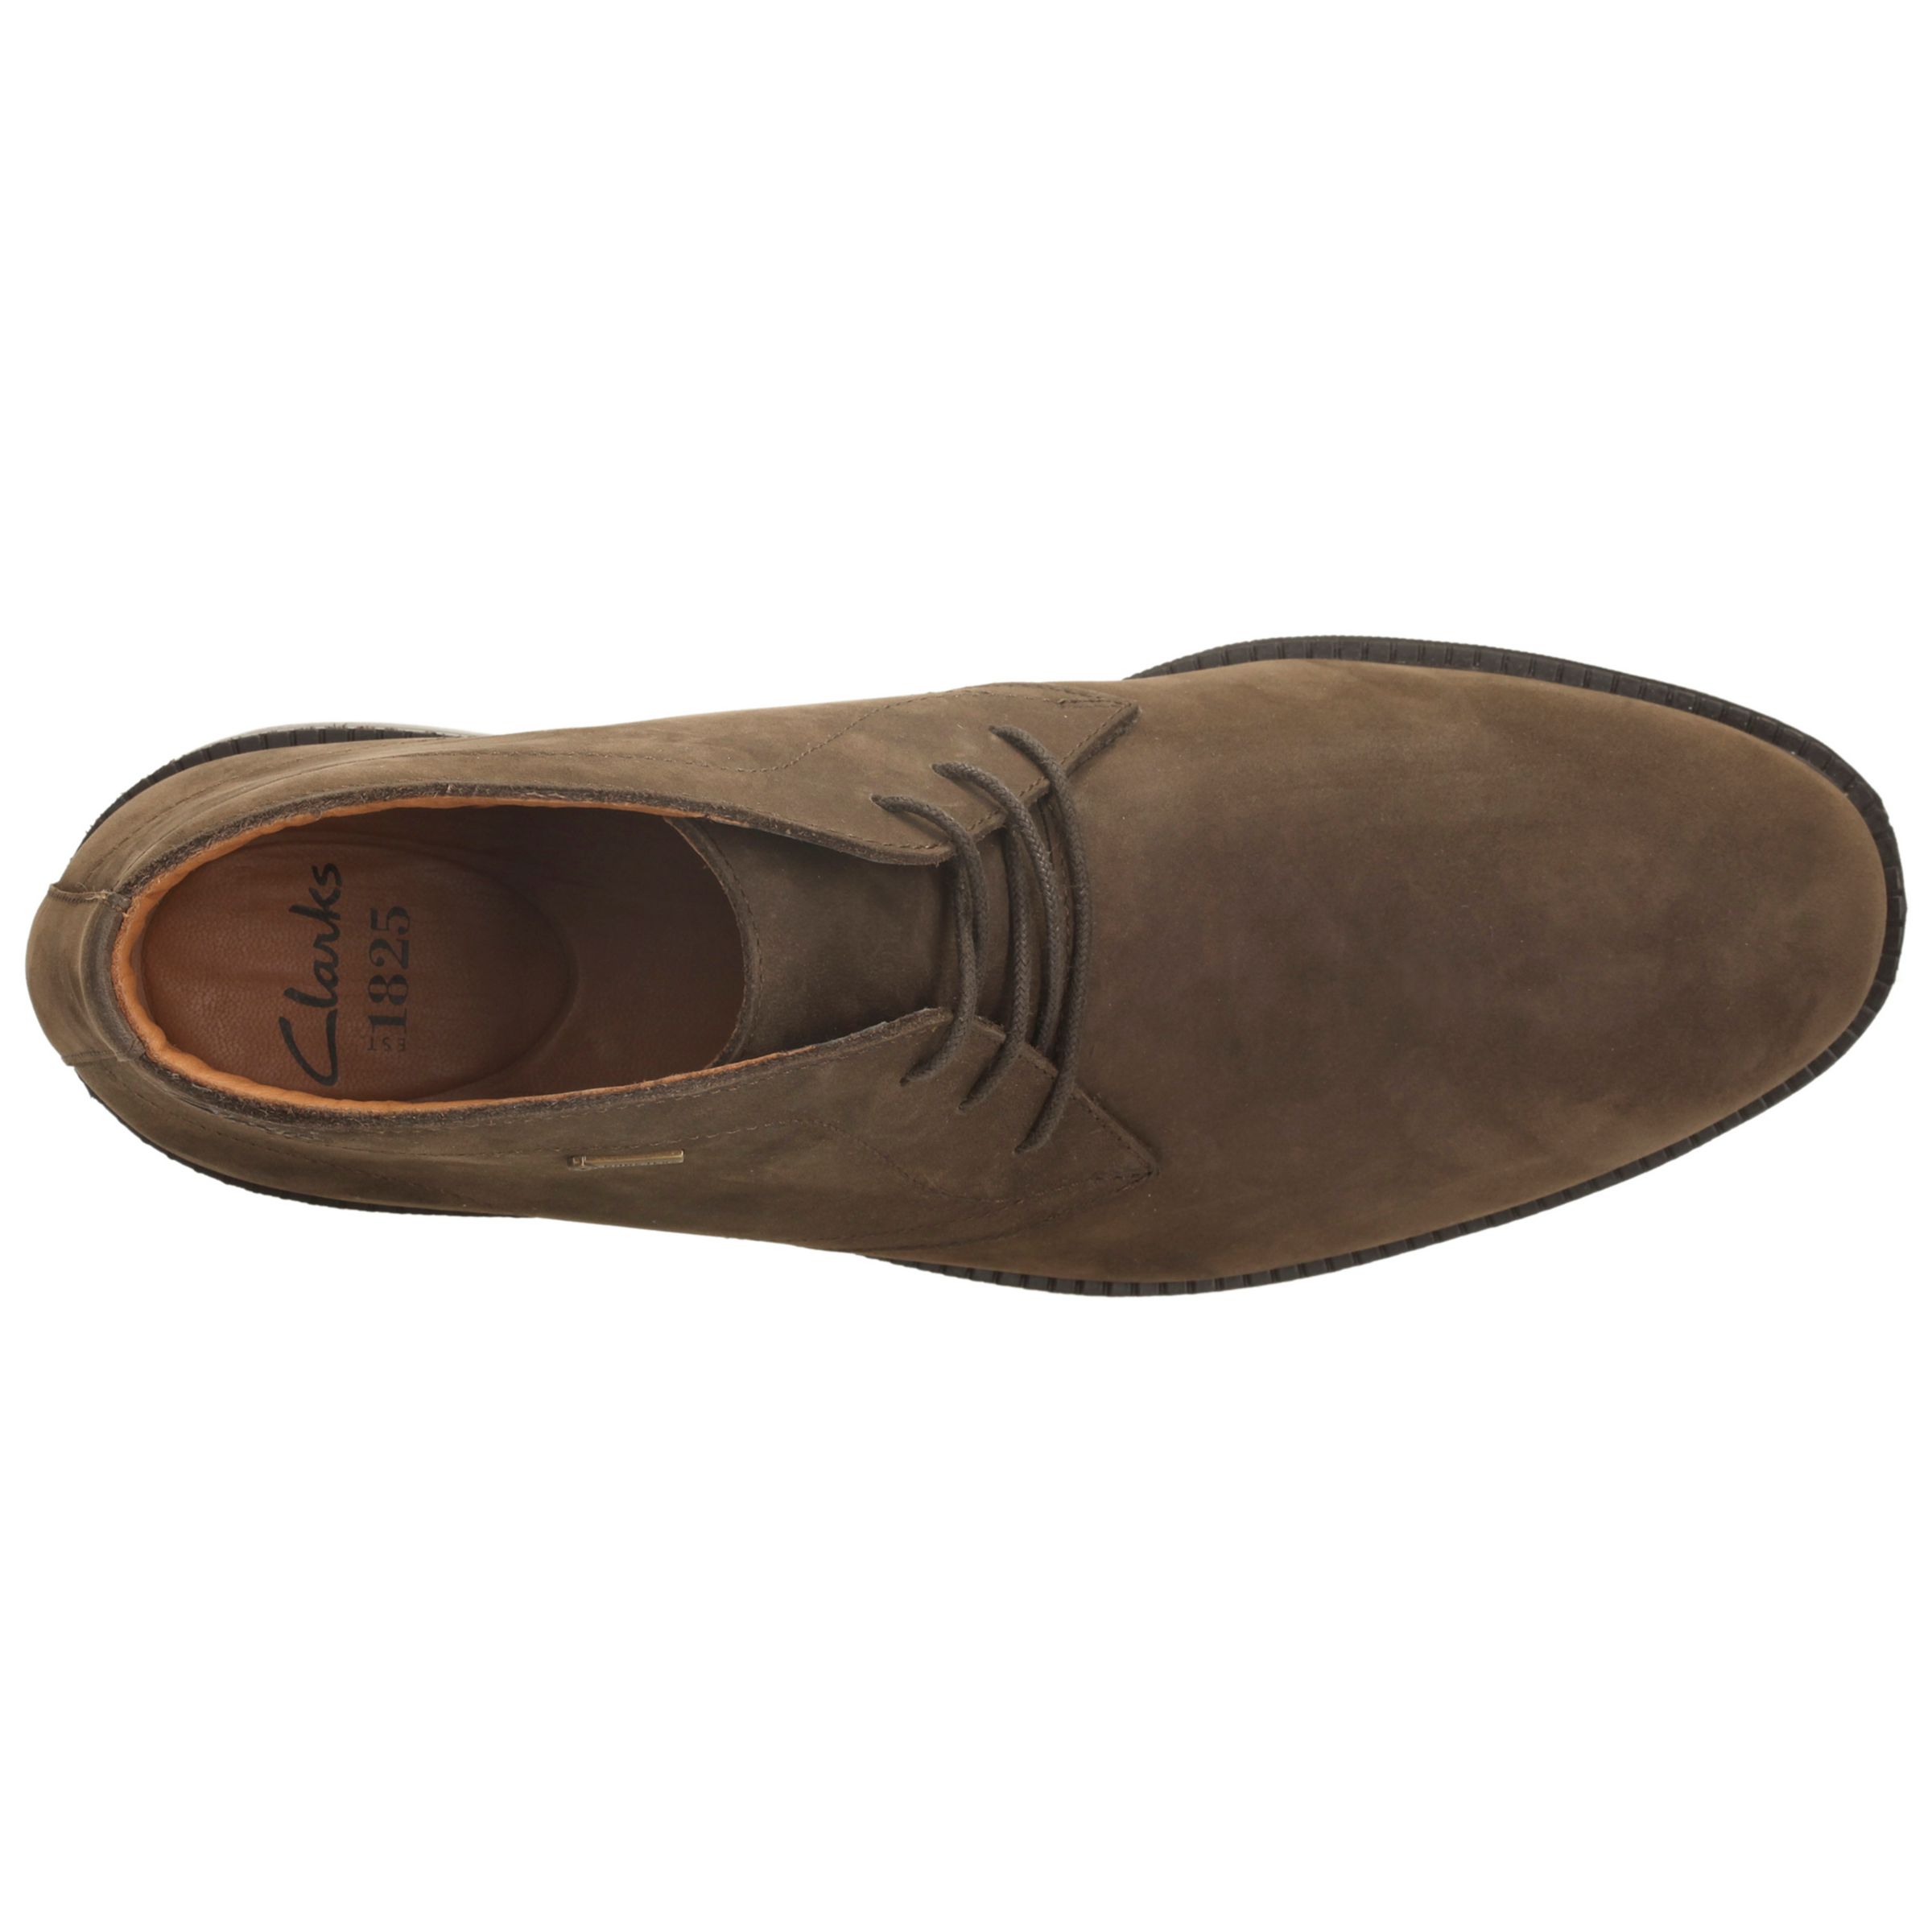 clarks brown suede chilver chukka boots